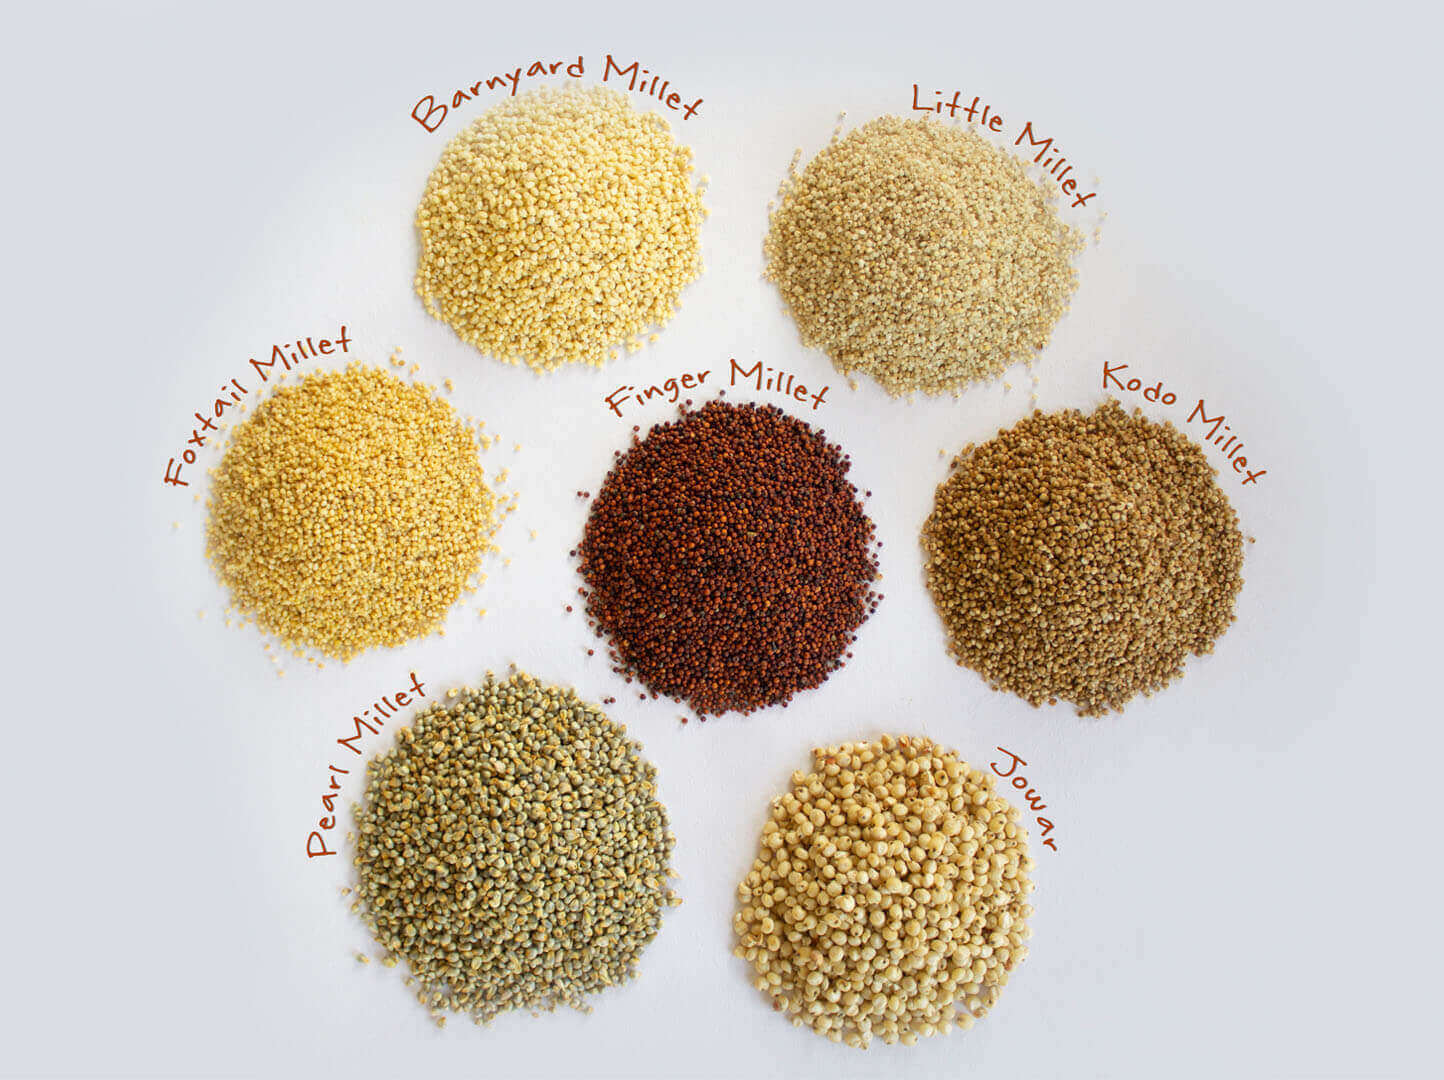 Best Millets in India